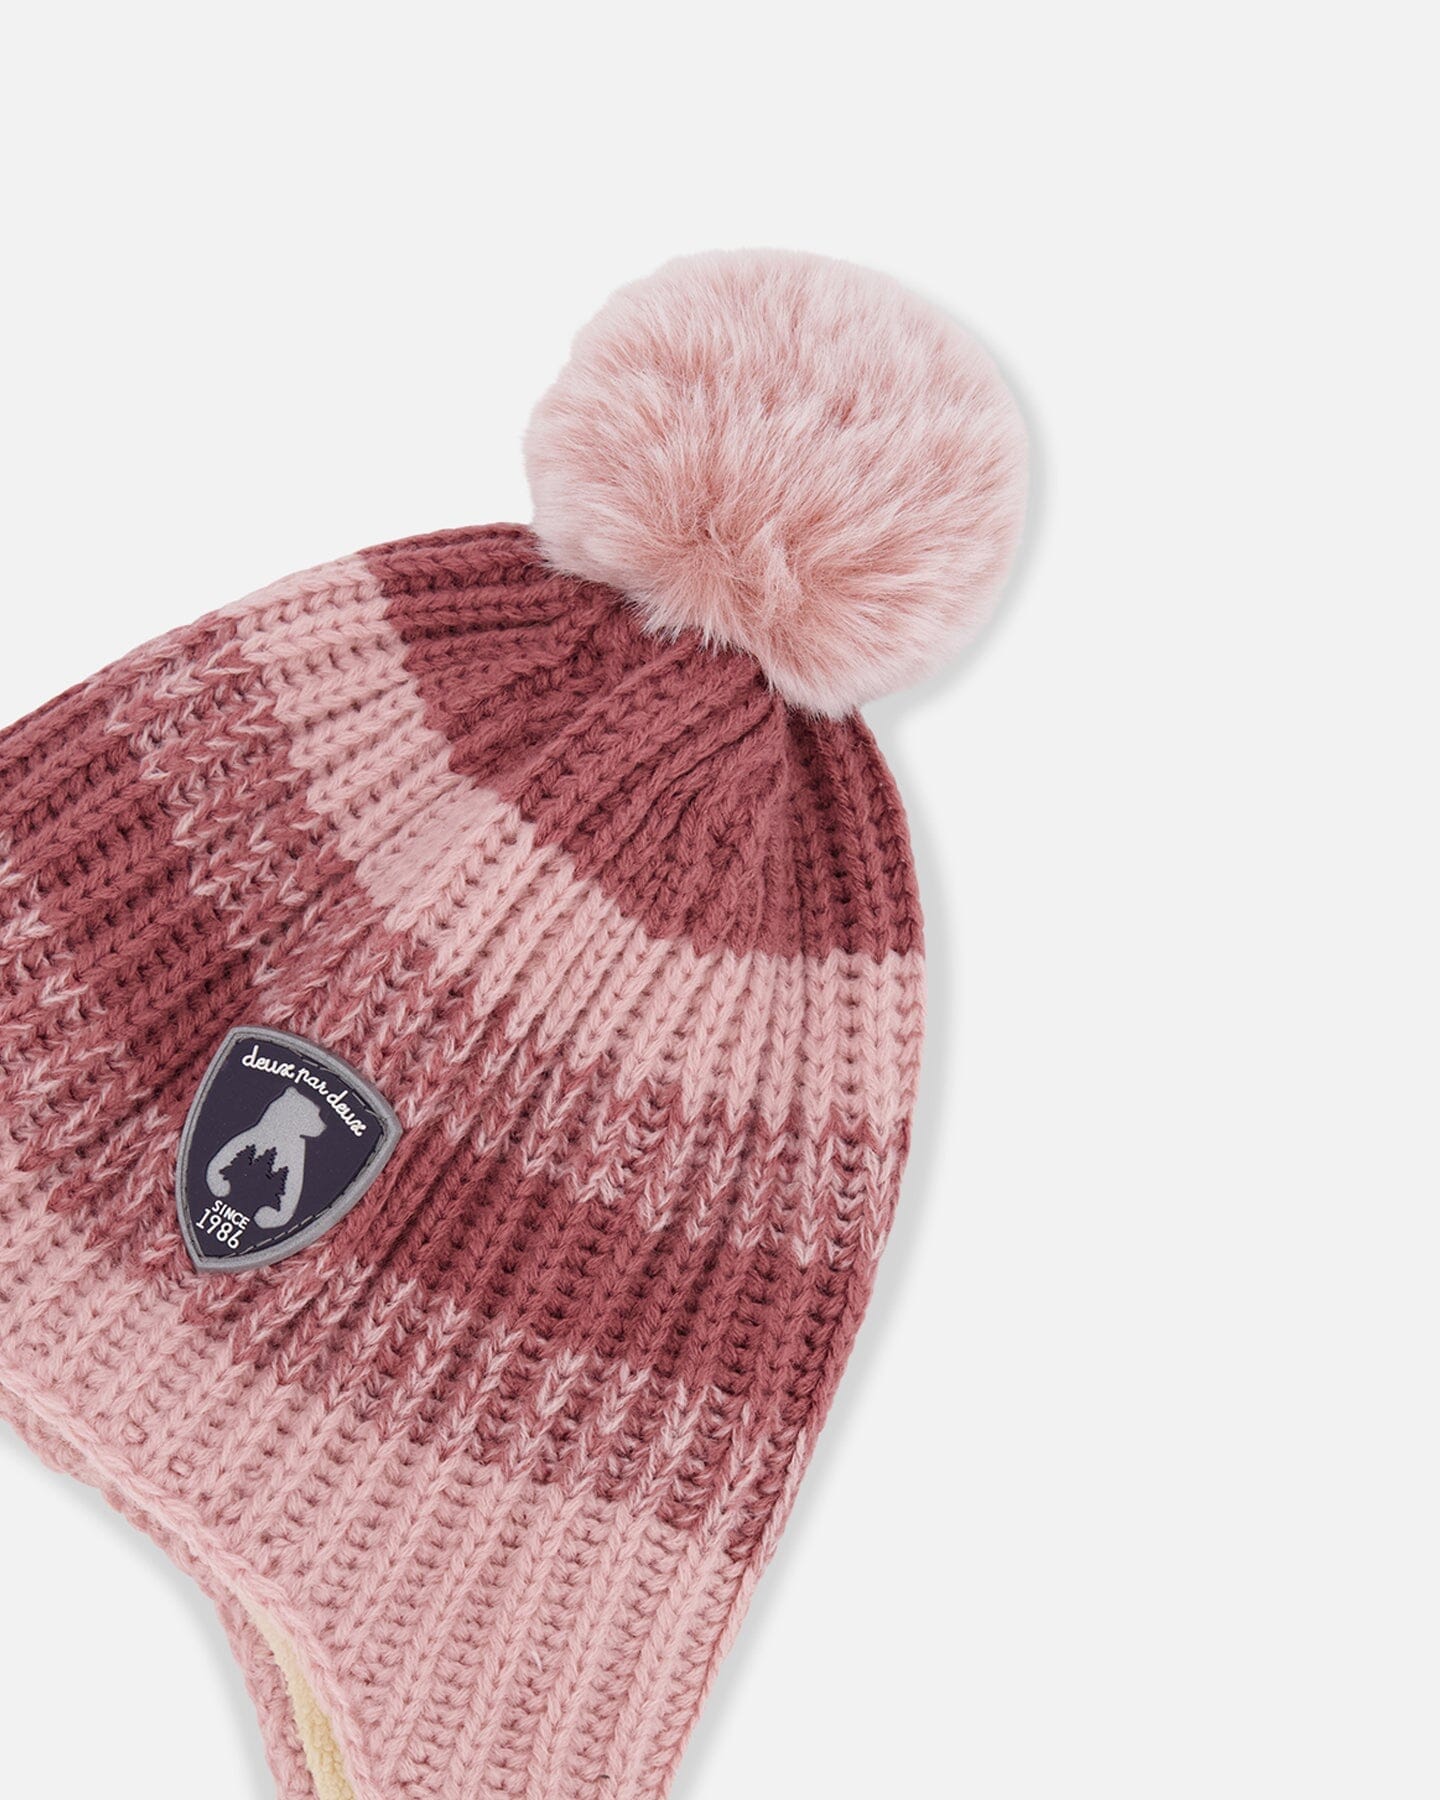 Peruvian Striped Knit Hat In Pink For Baby - F10ZB02_000